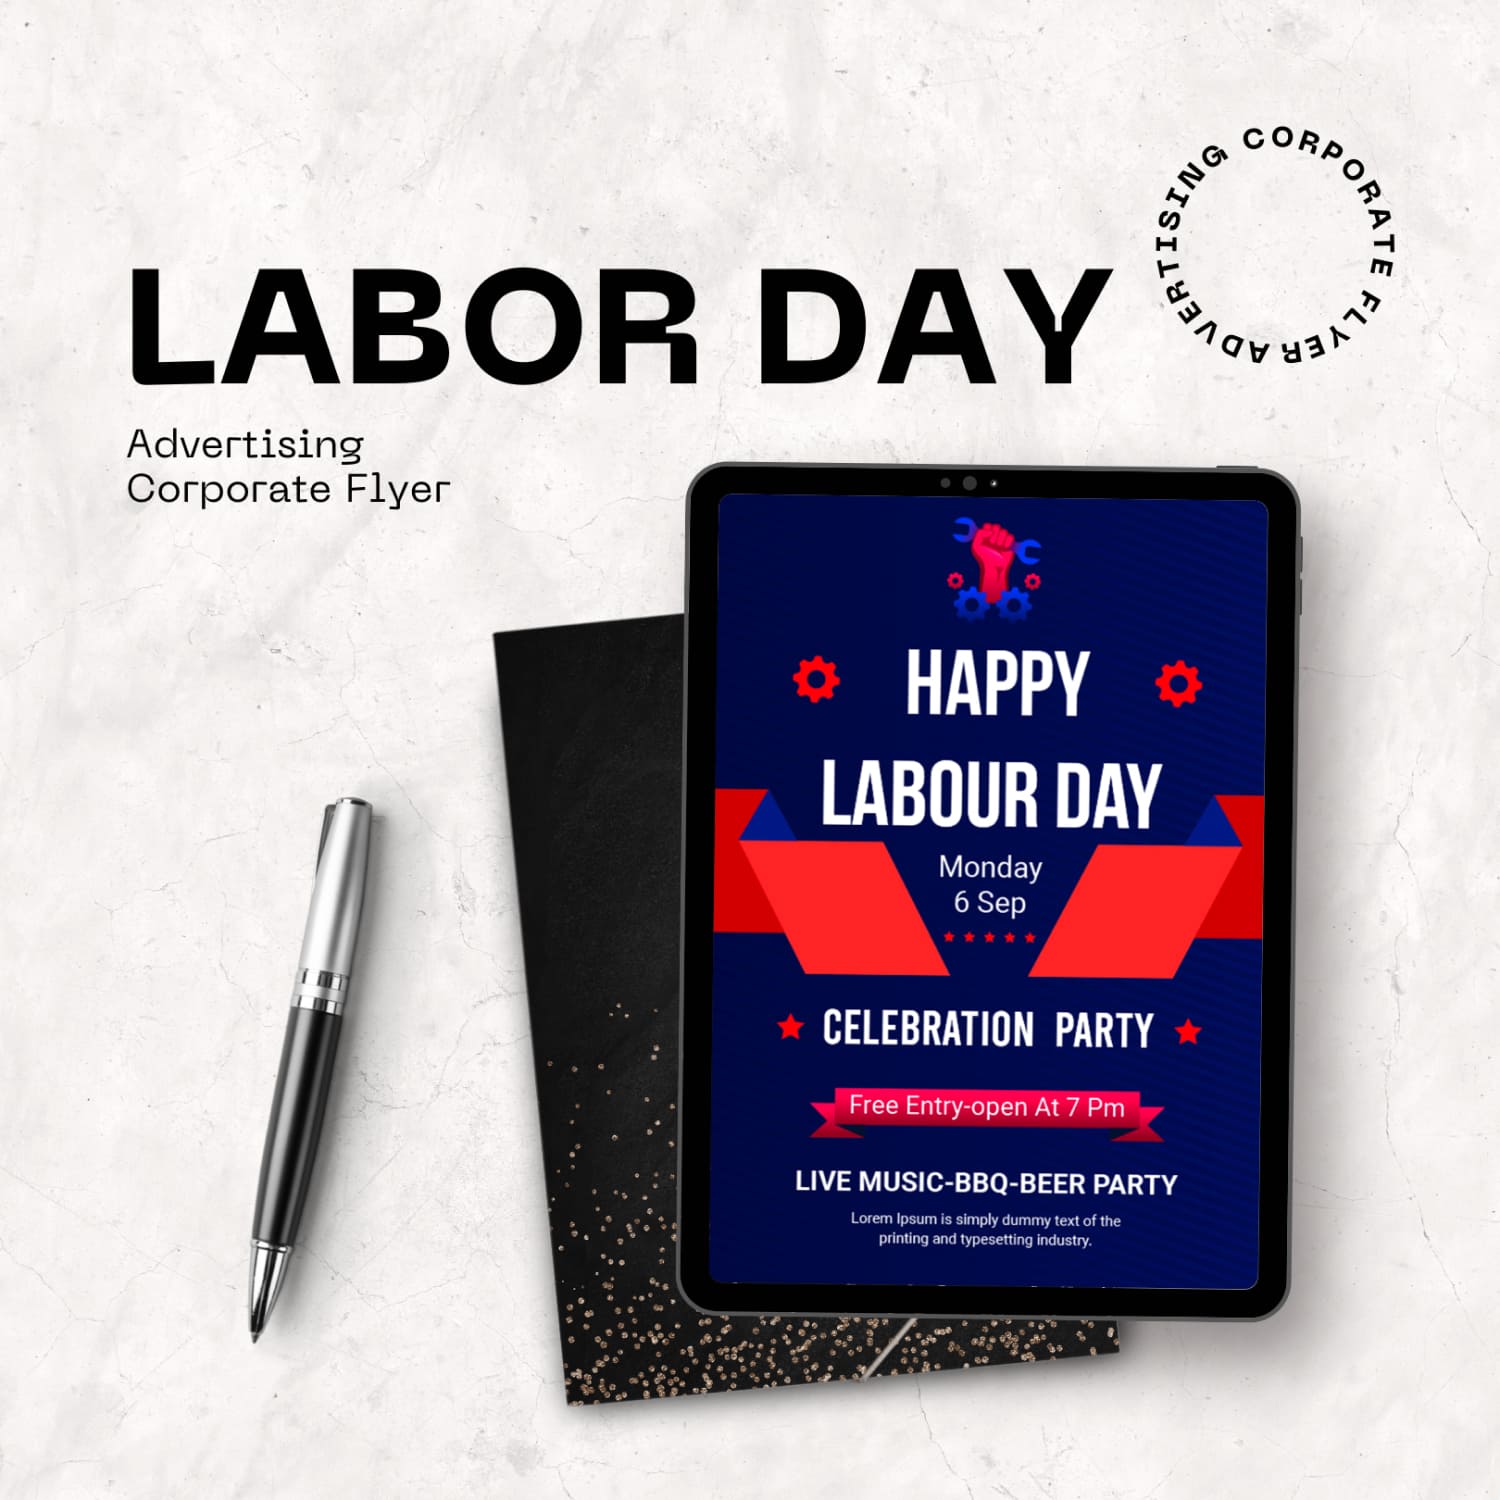 Labor Day Advertising Corporate Flyer.